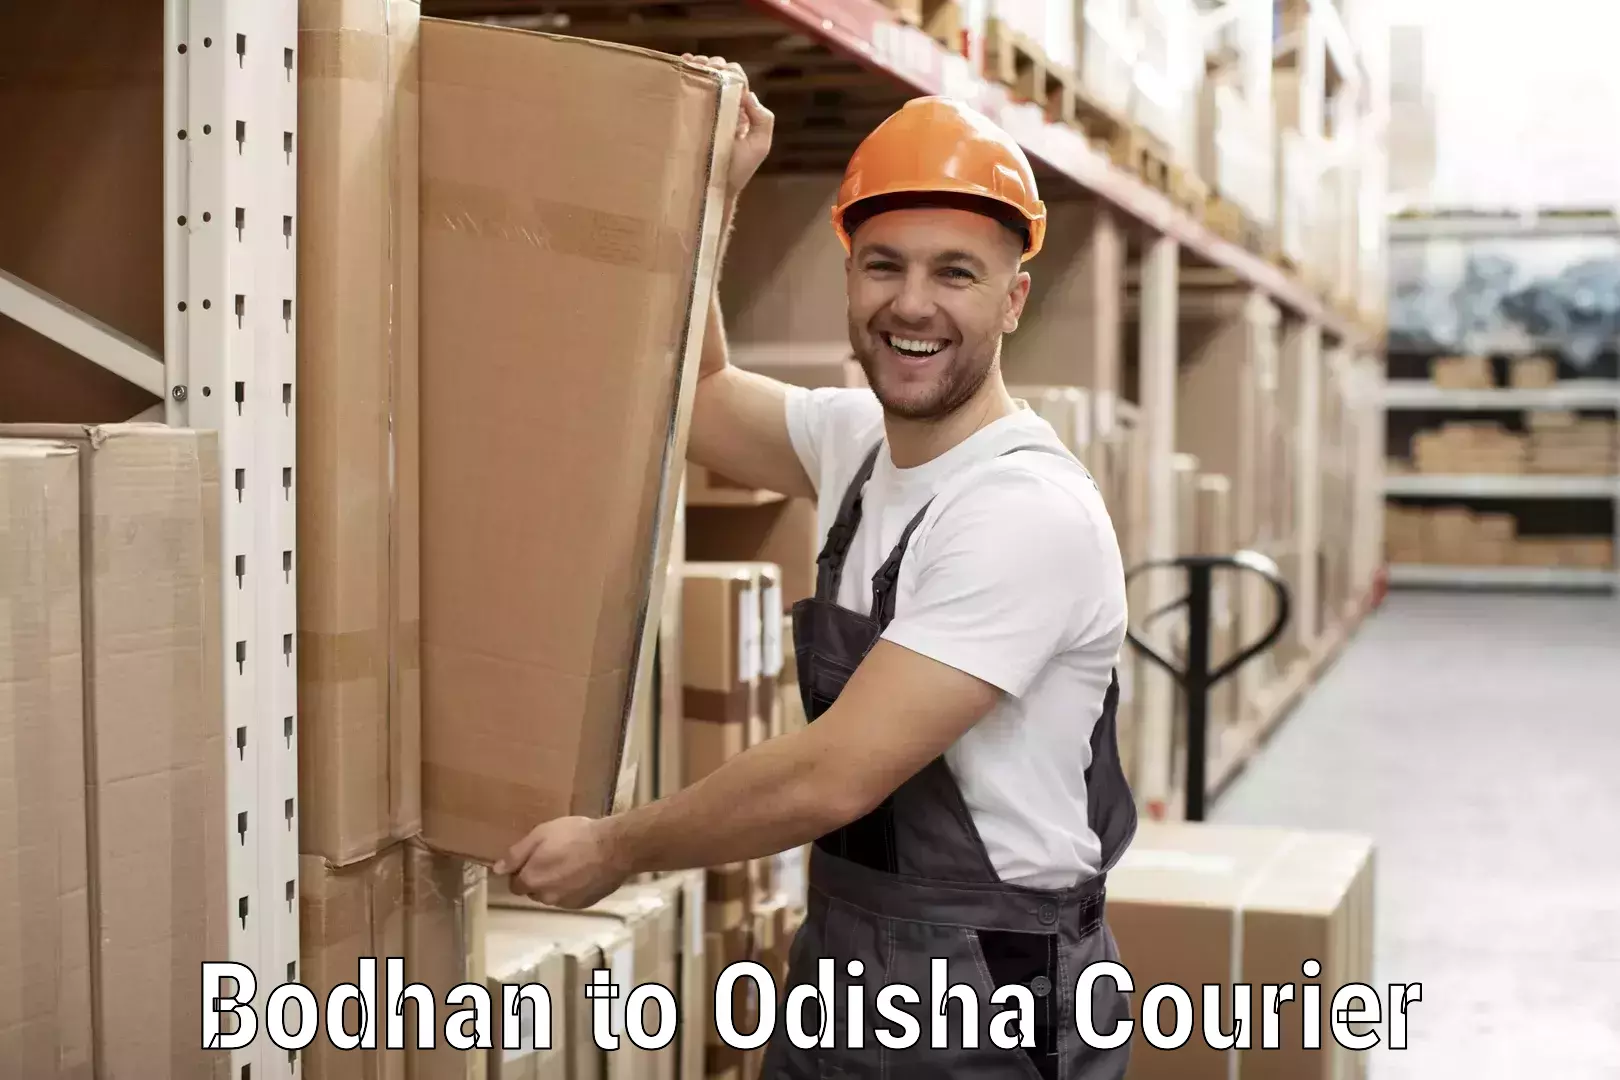 Sustainable courier practices Bodhan to Loisingha